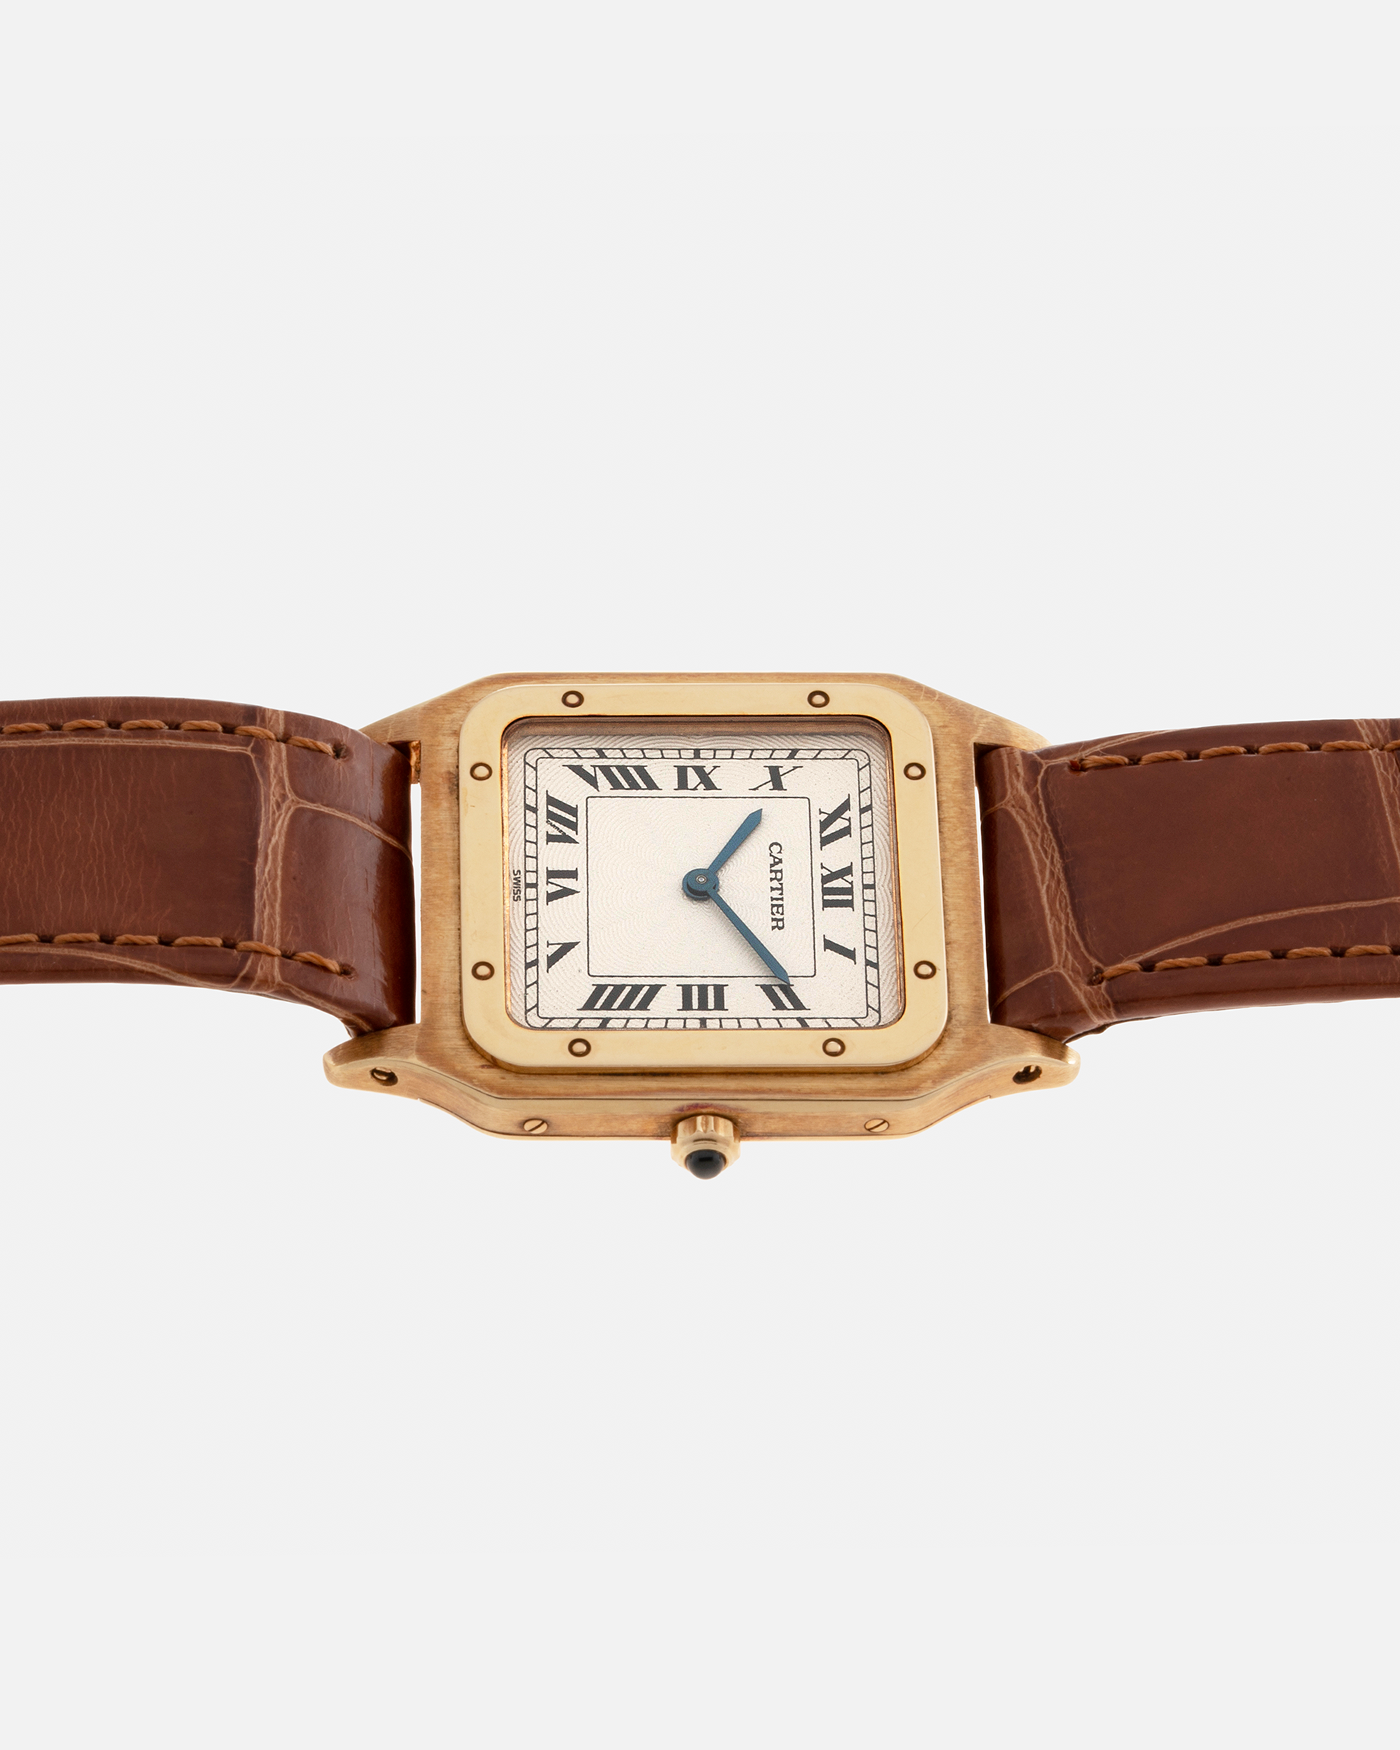 Brand: Cartier Year: 1990s Model: Santos-Dumont Reference: 1576 Material: 18-carat Yellow Gold Movement: Cartier Cal. 021 MC (Frédéric Piguet Cal. 21 based), Manual-Winding Case Diameter: 27mm Lug Width: 18mm Strap: Cartier Light Brown Alligator Leather Strap with Signed 18-carat Yellow Gold Tang Buckle